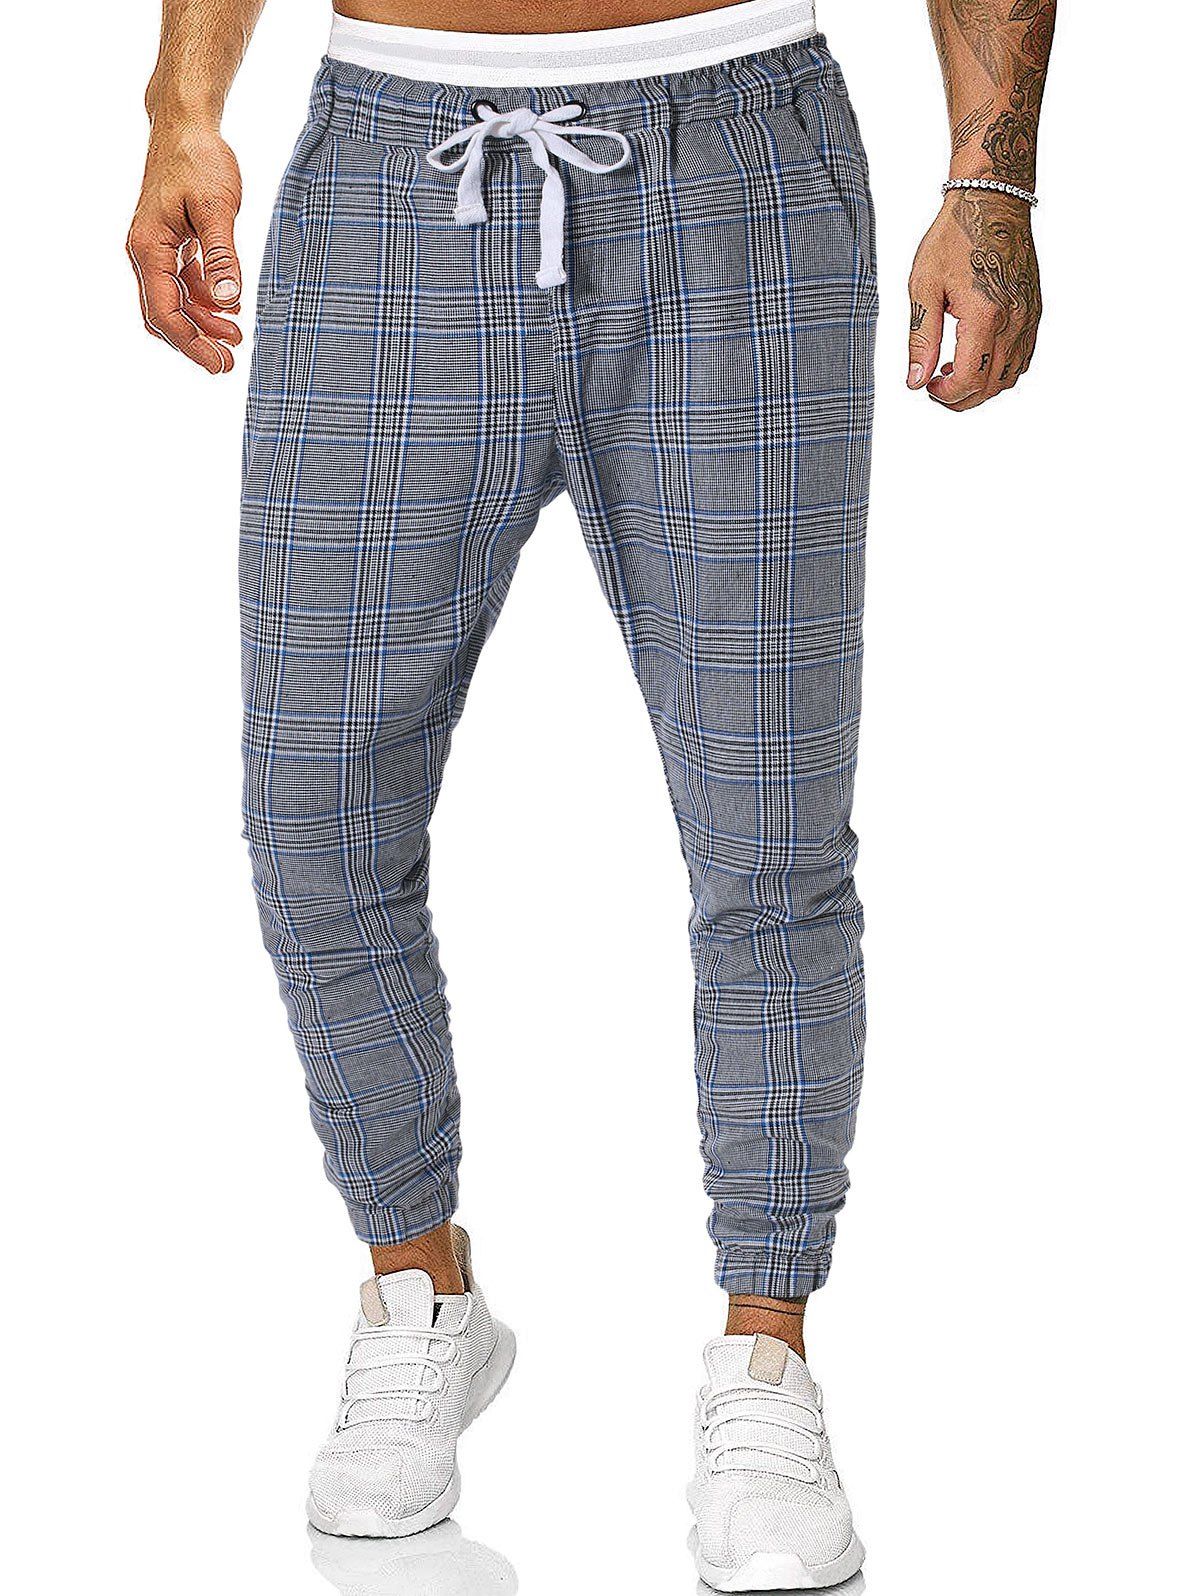 [28% OFF] 2021 Houndstooth Plaid Print Casual Jogger Pants In BLUE GRAY ...